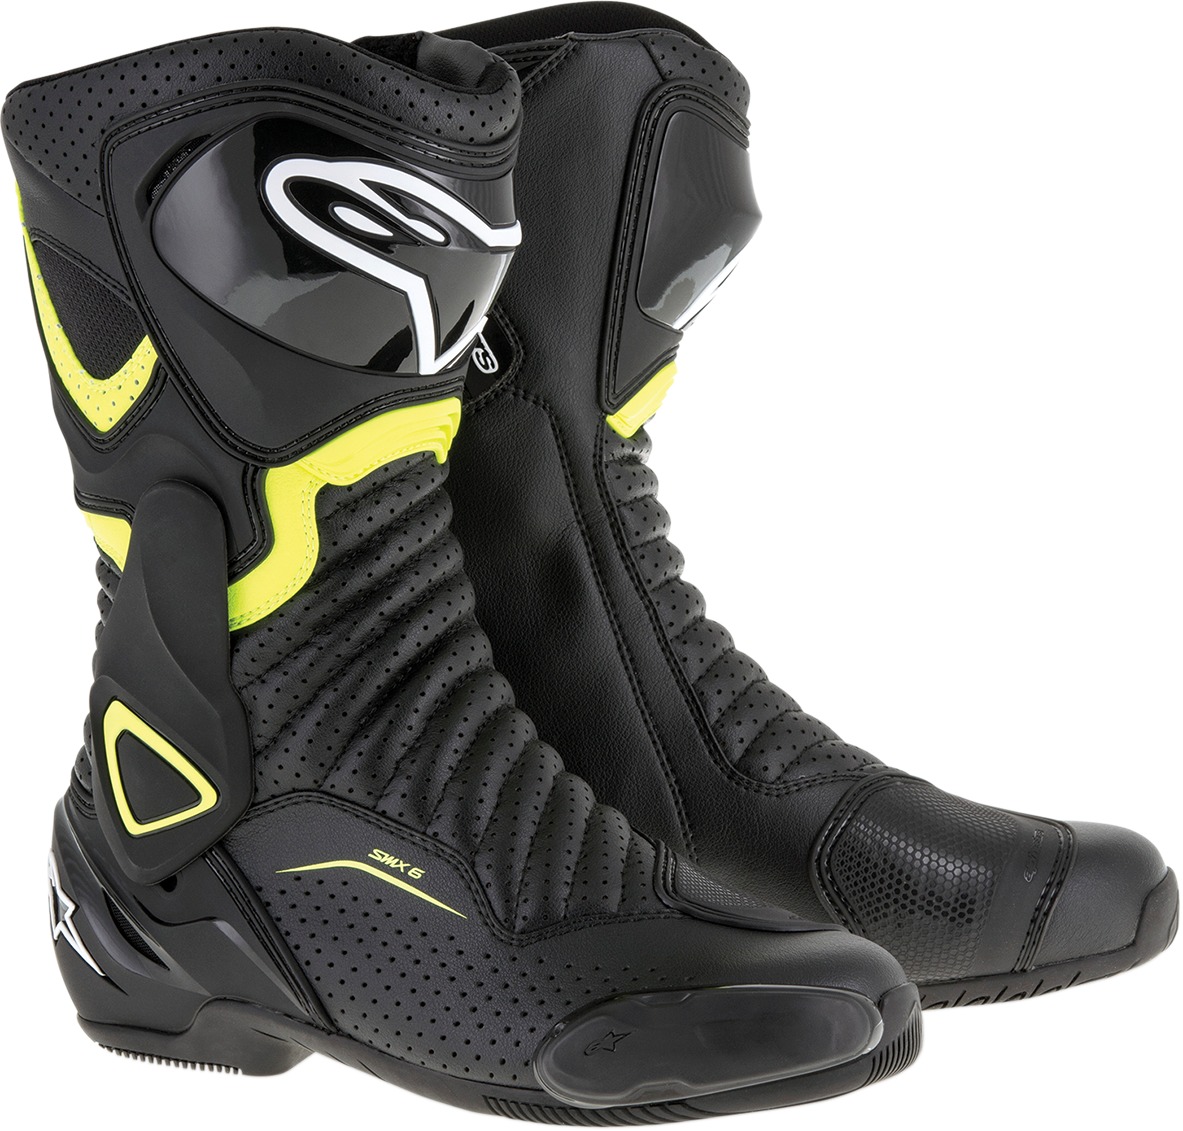 SMX-6v2 Vented Street Riding Boots Black/Yellow US 10.5 - Click Image to Close